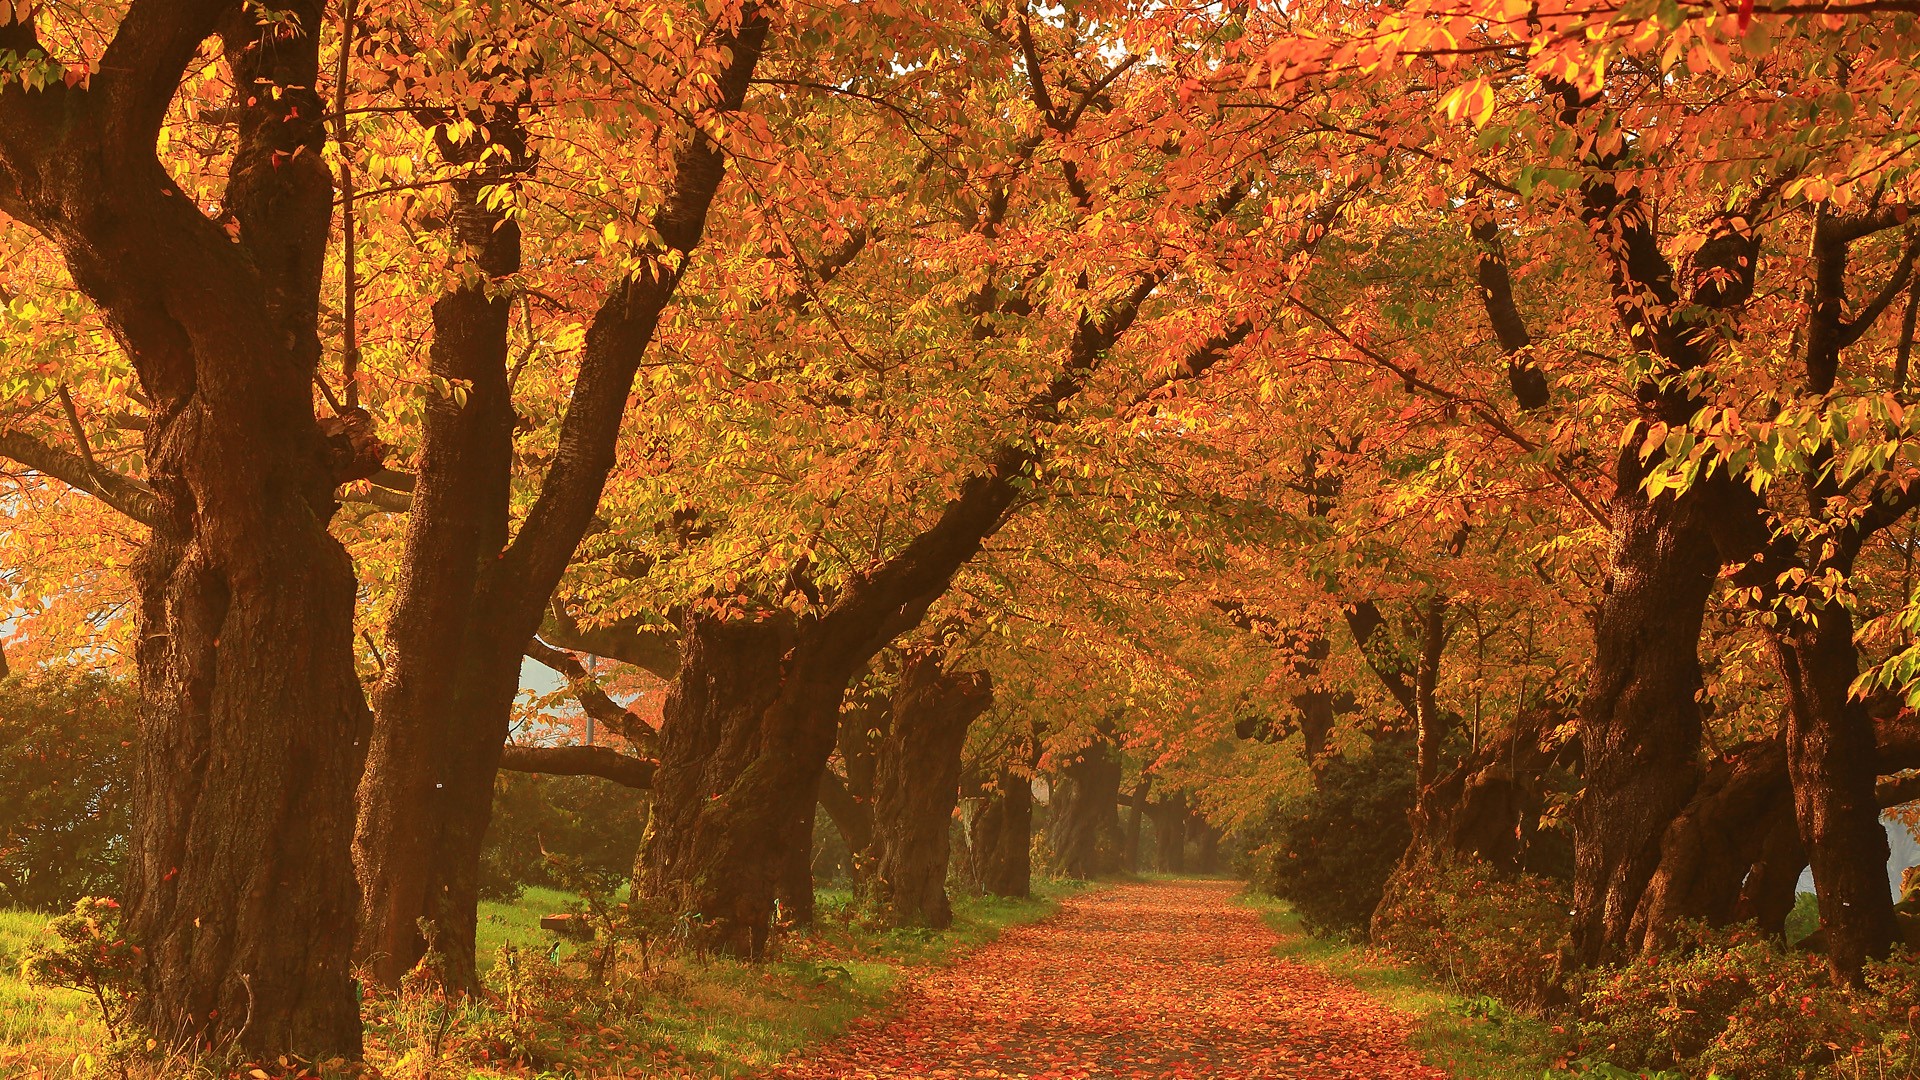 General 1920x1080 nature landscape trees leaves fall path old tree grass plants tunnel cherry trees Japan